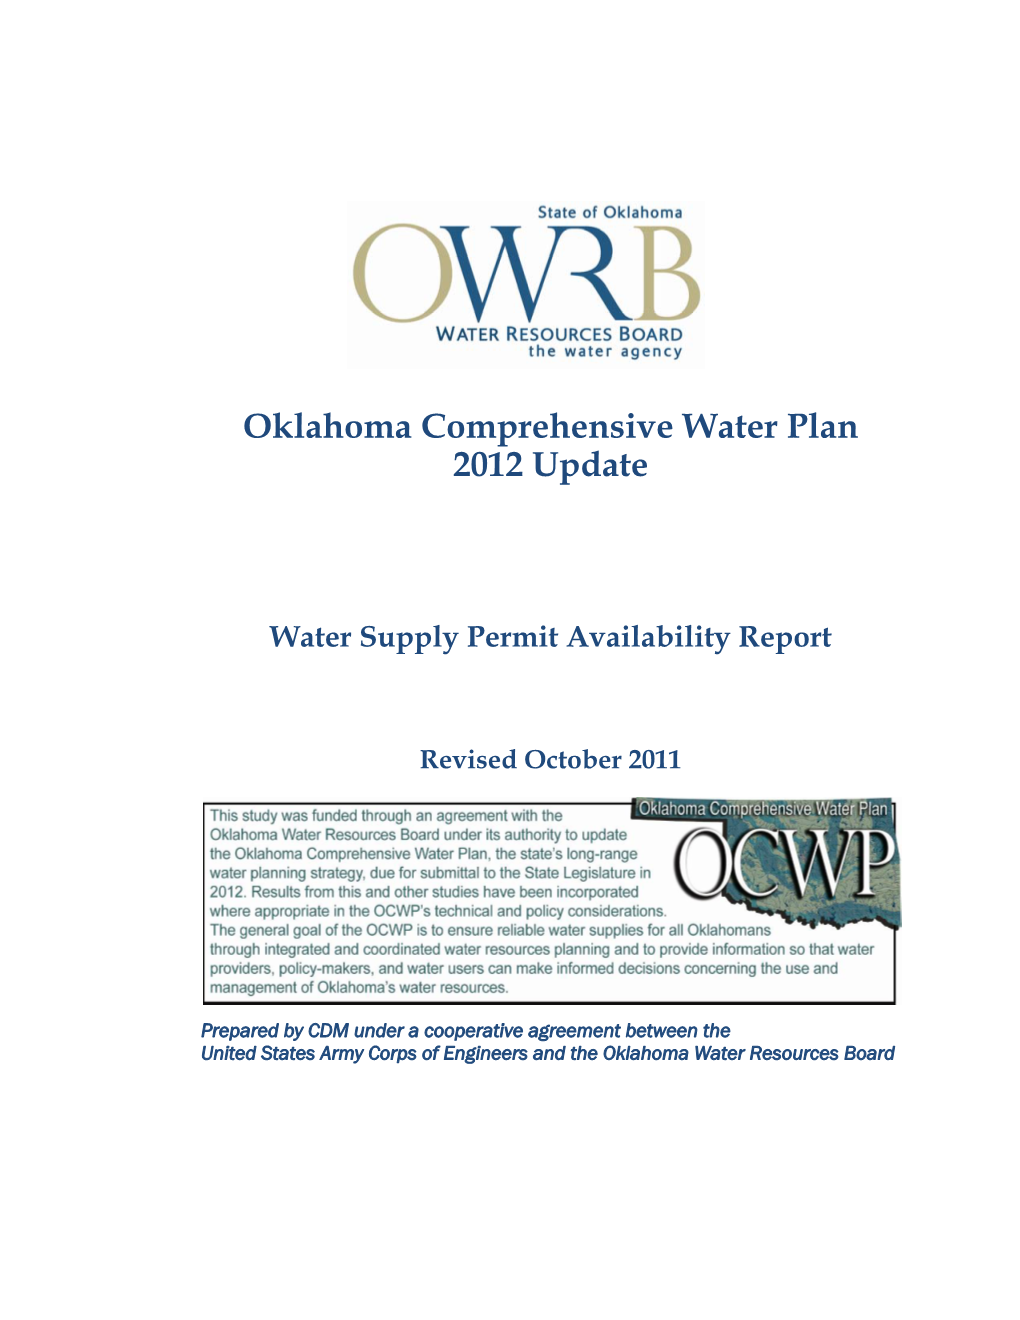 Water Supply Permit Availability Report